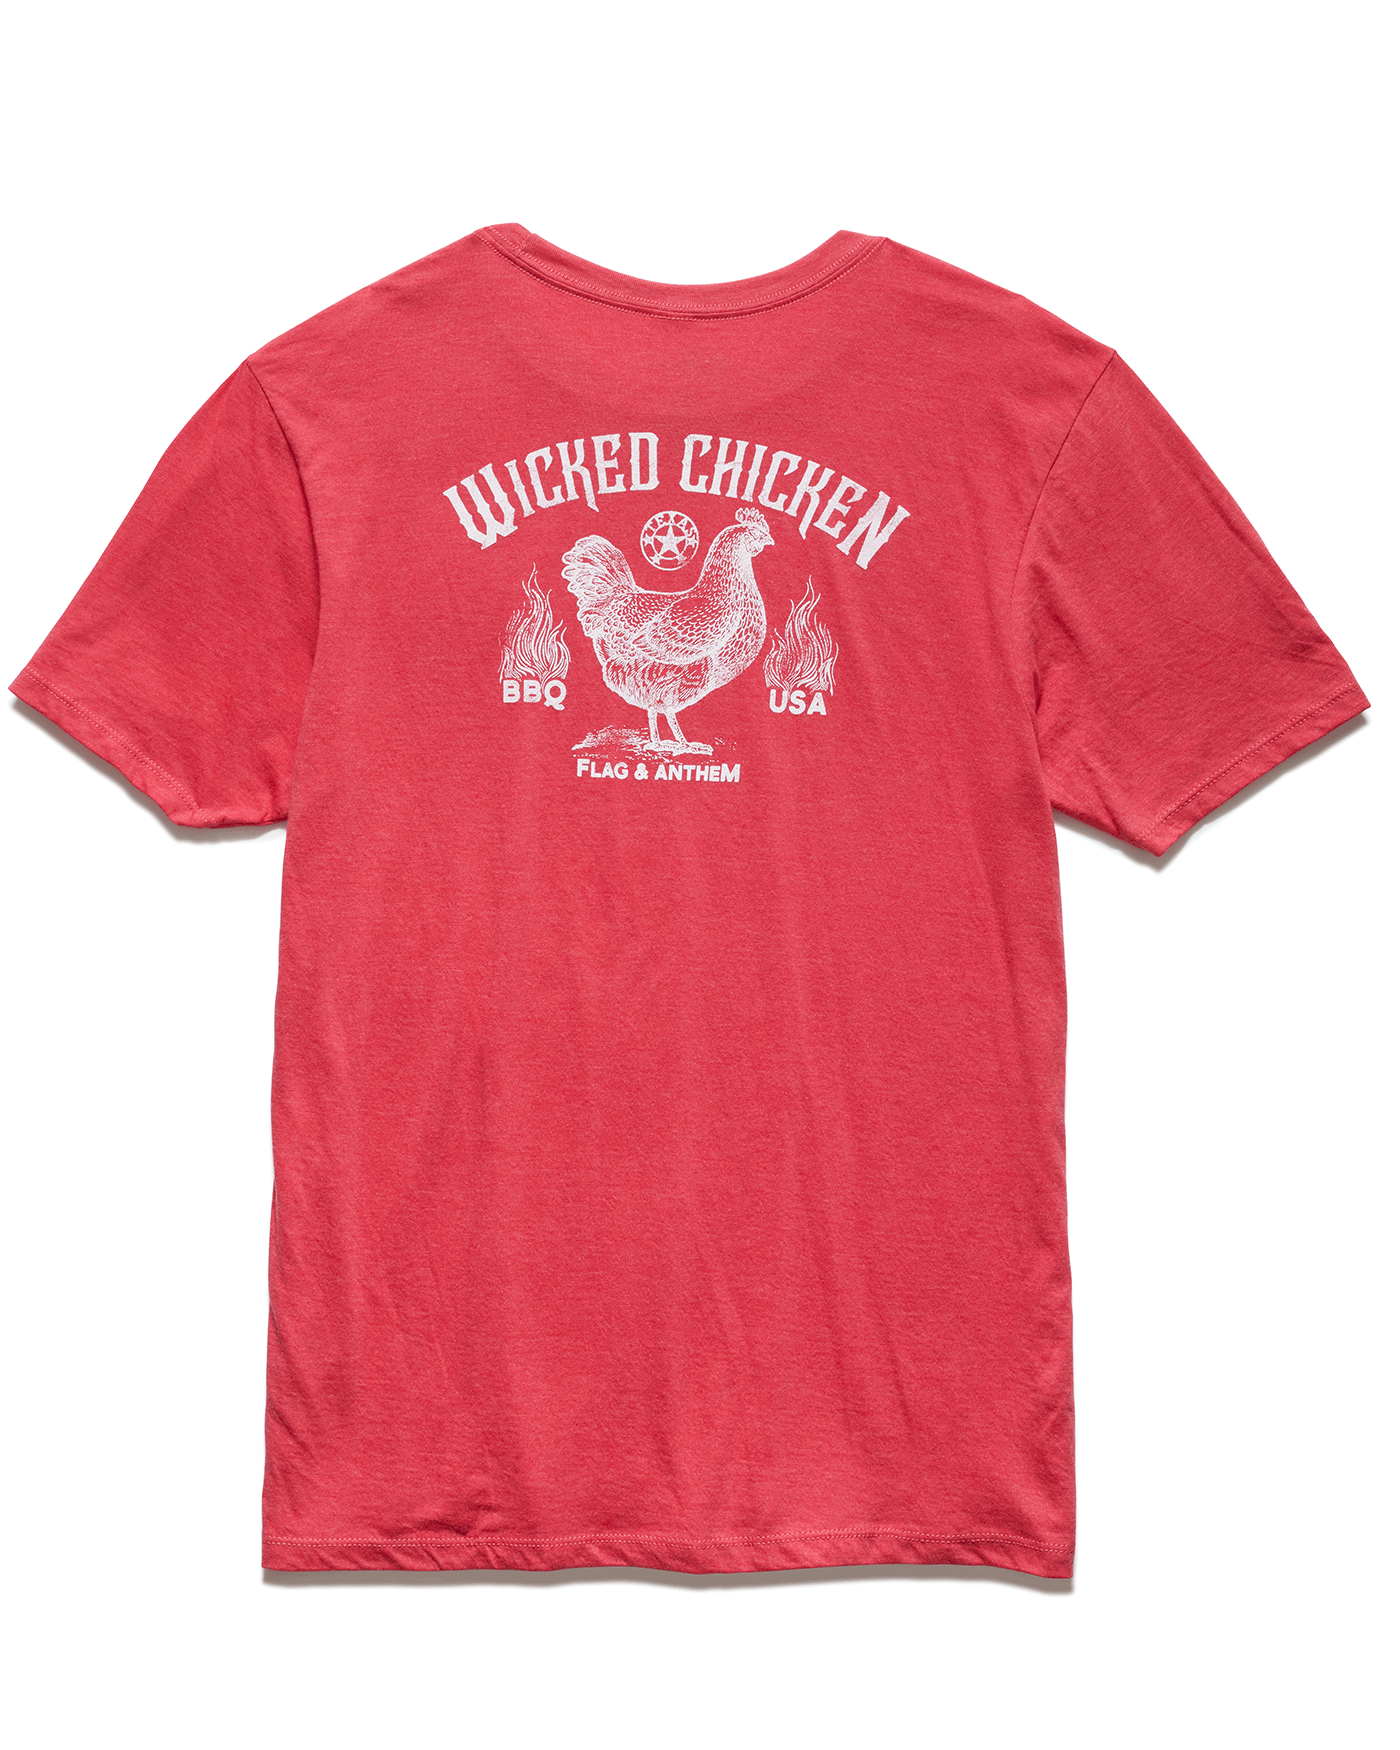 WICKED CHICKEN TEE